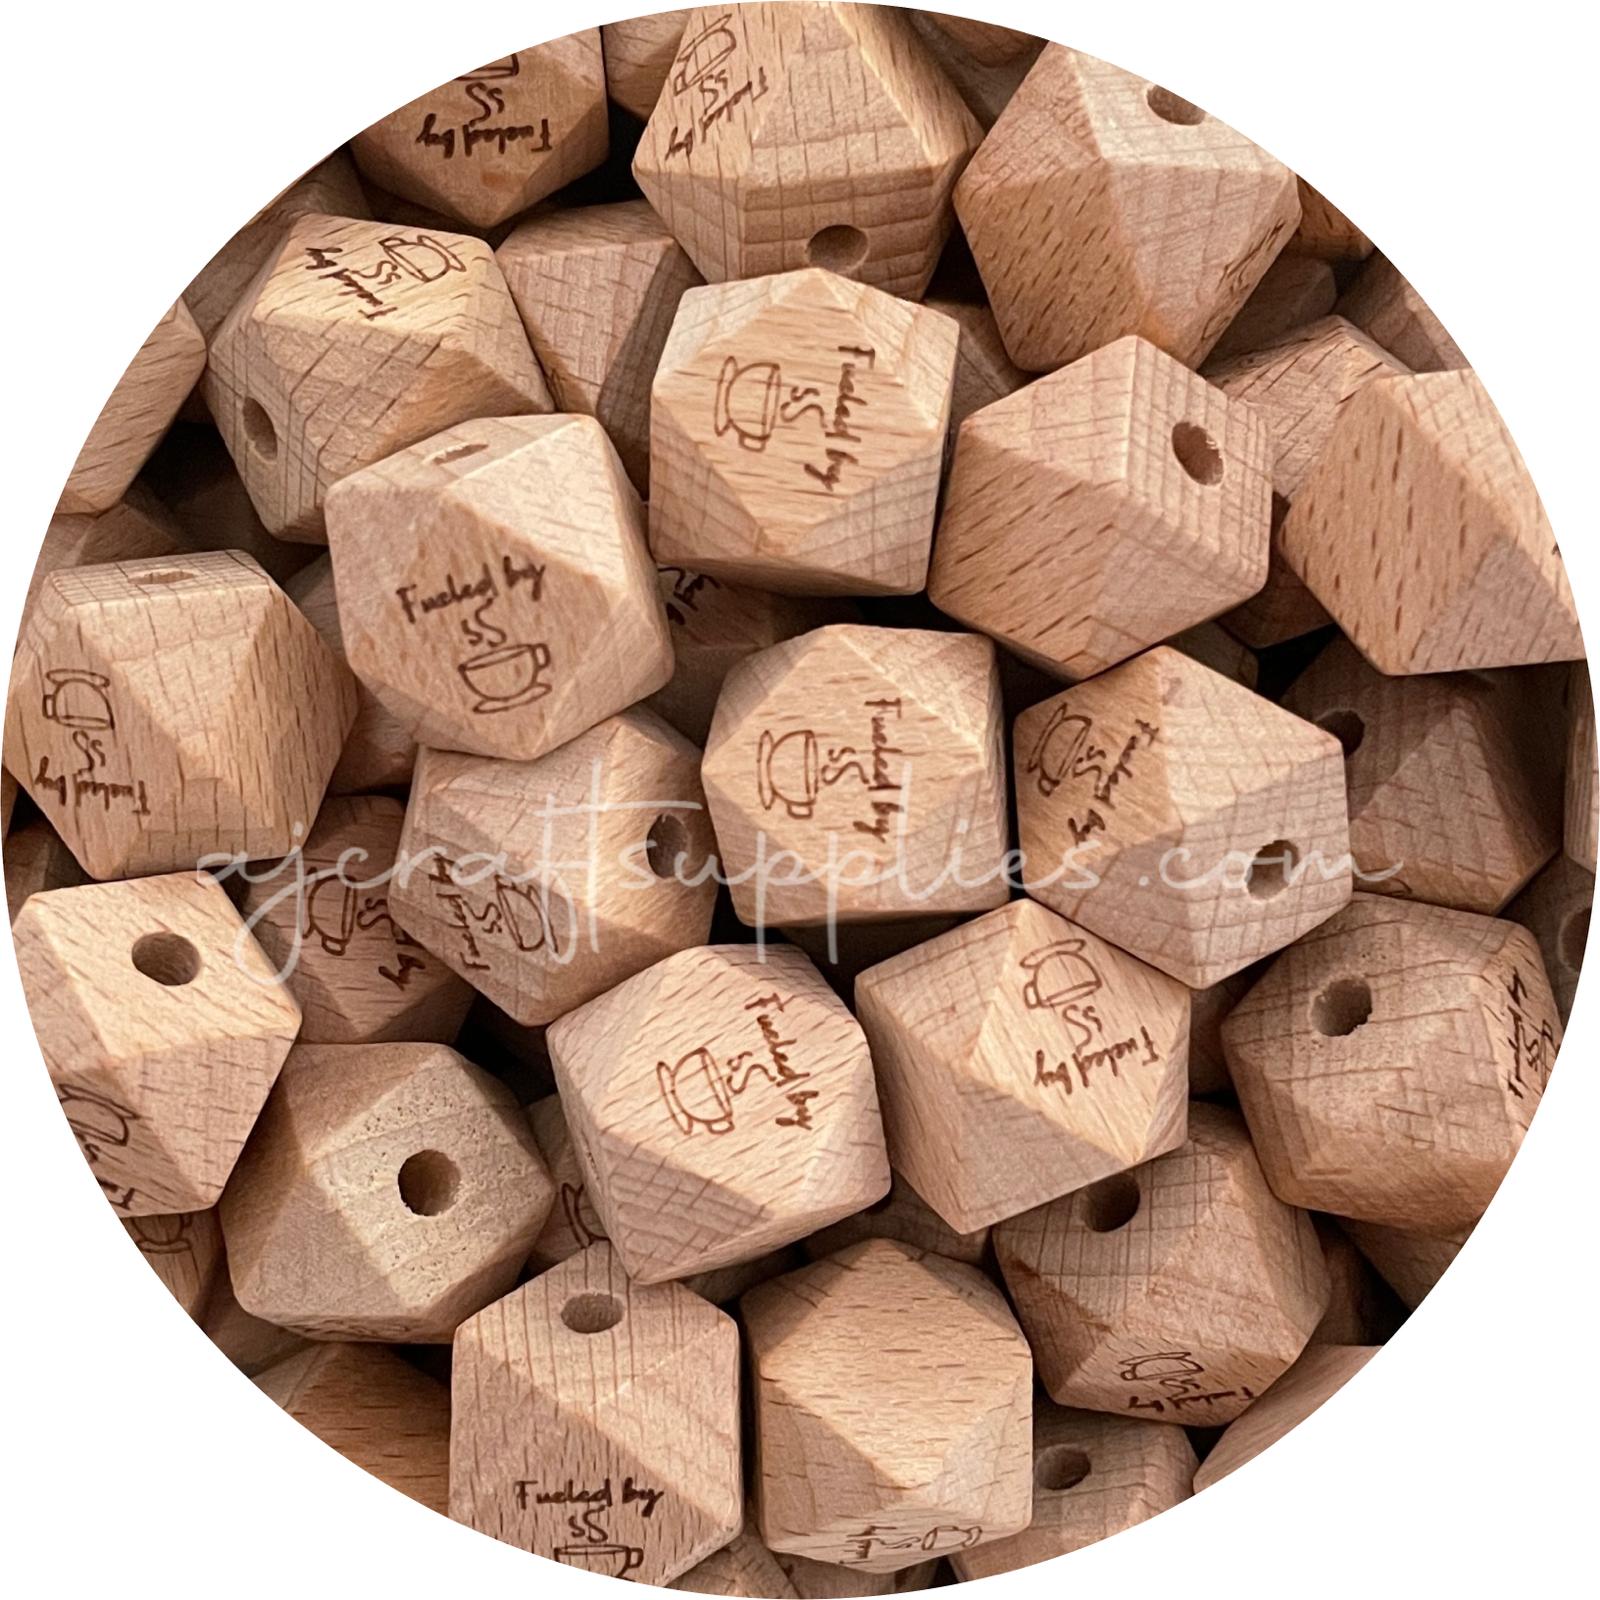 Beech Wood Engraved Beads (Fueled by Caffeine) - 18mm Hexagon- 5 beads (Limited Edition)